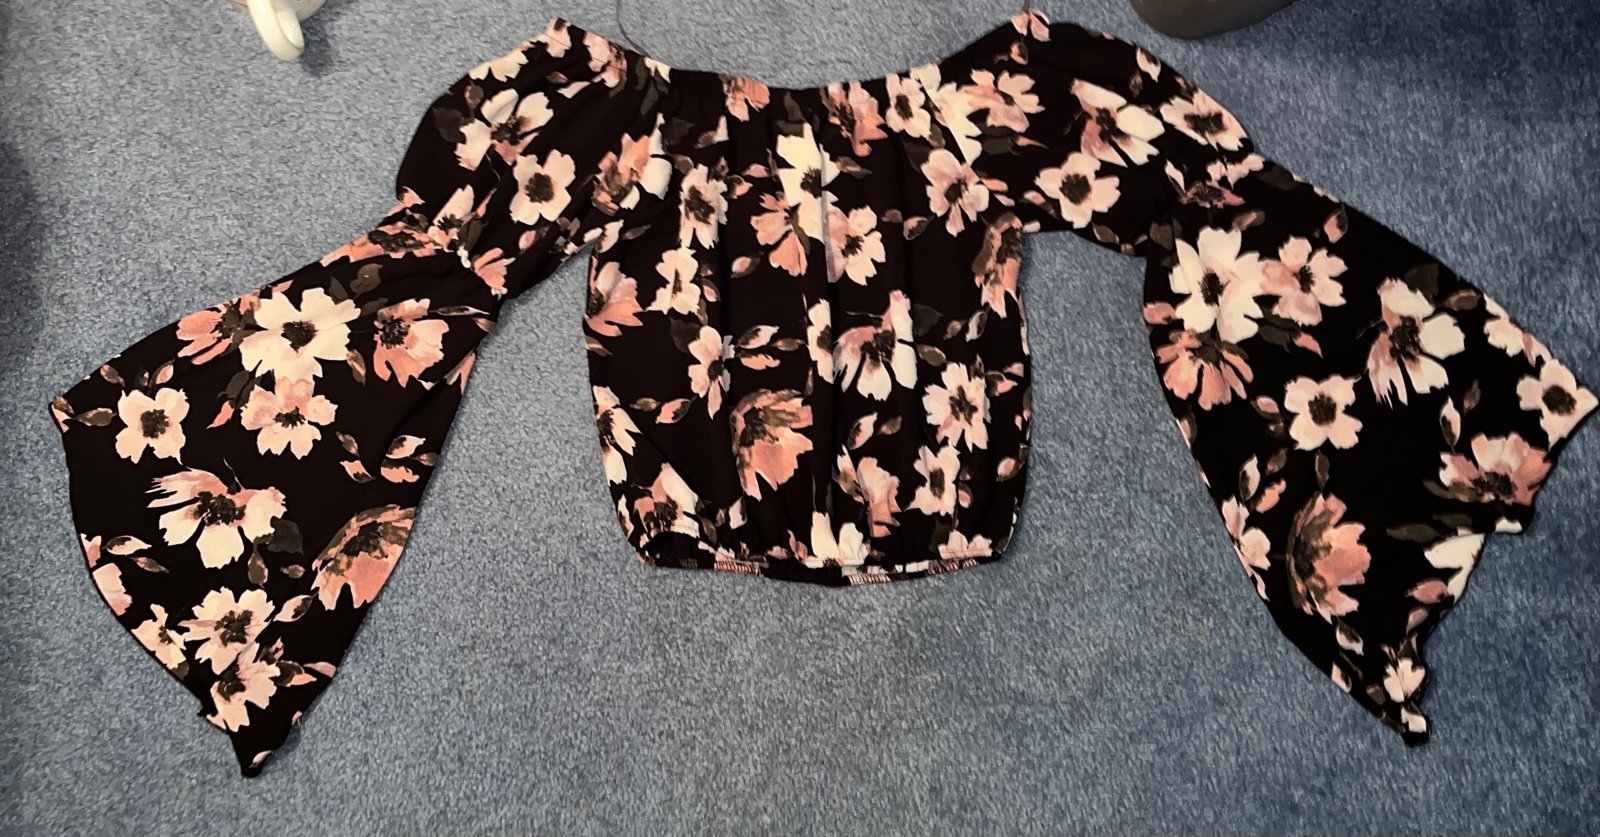 Comfortable Women’s Topia Small Floral Top w| Wide Sleeves - *NEVER WORN* HzEx3pWo7 Hot Sale